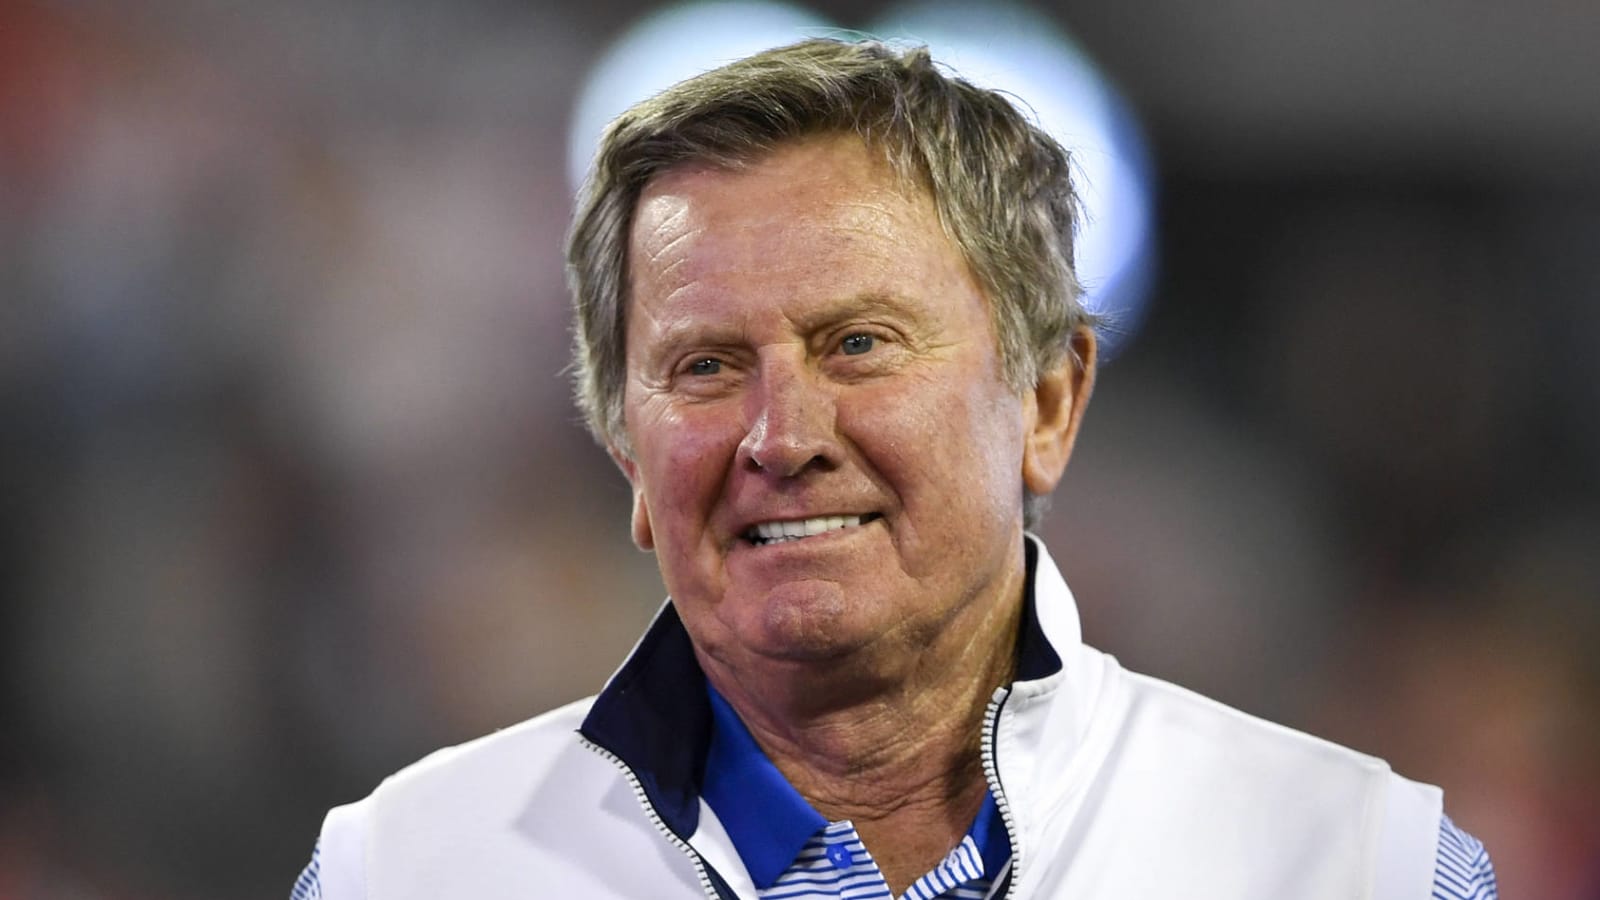 Steve Spurrier takes shot at Texas over move to SEC